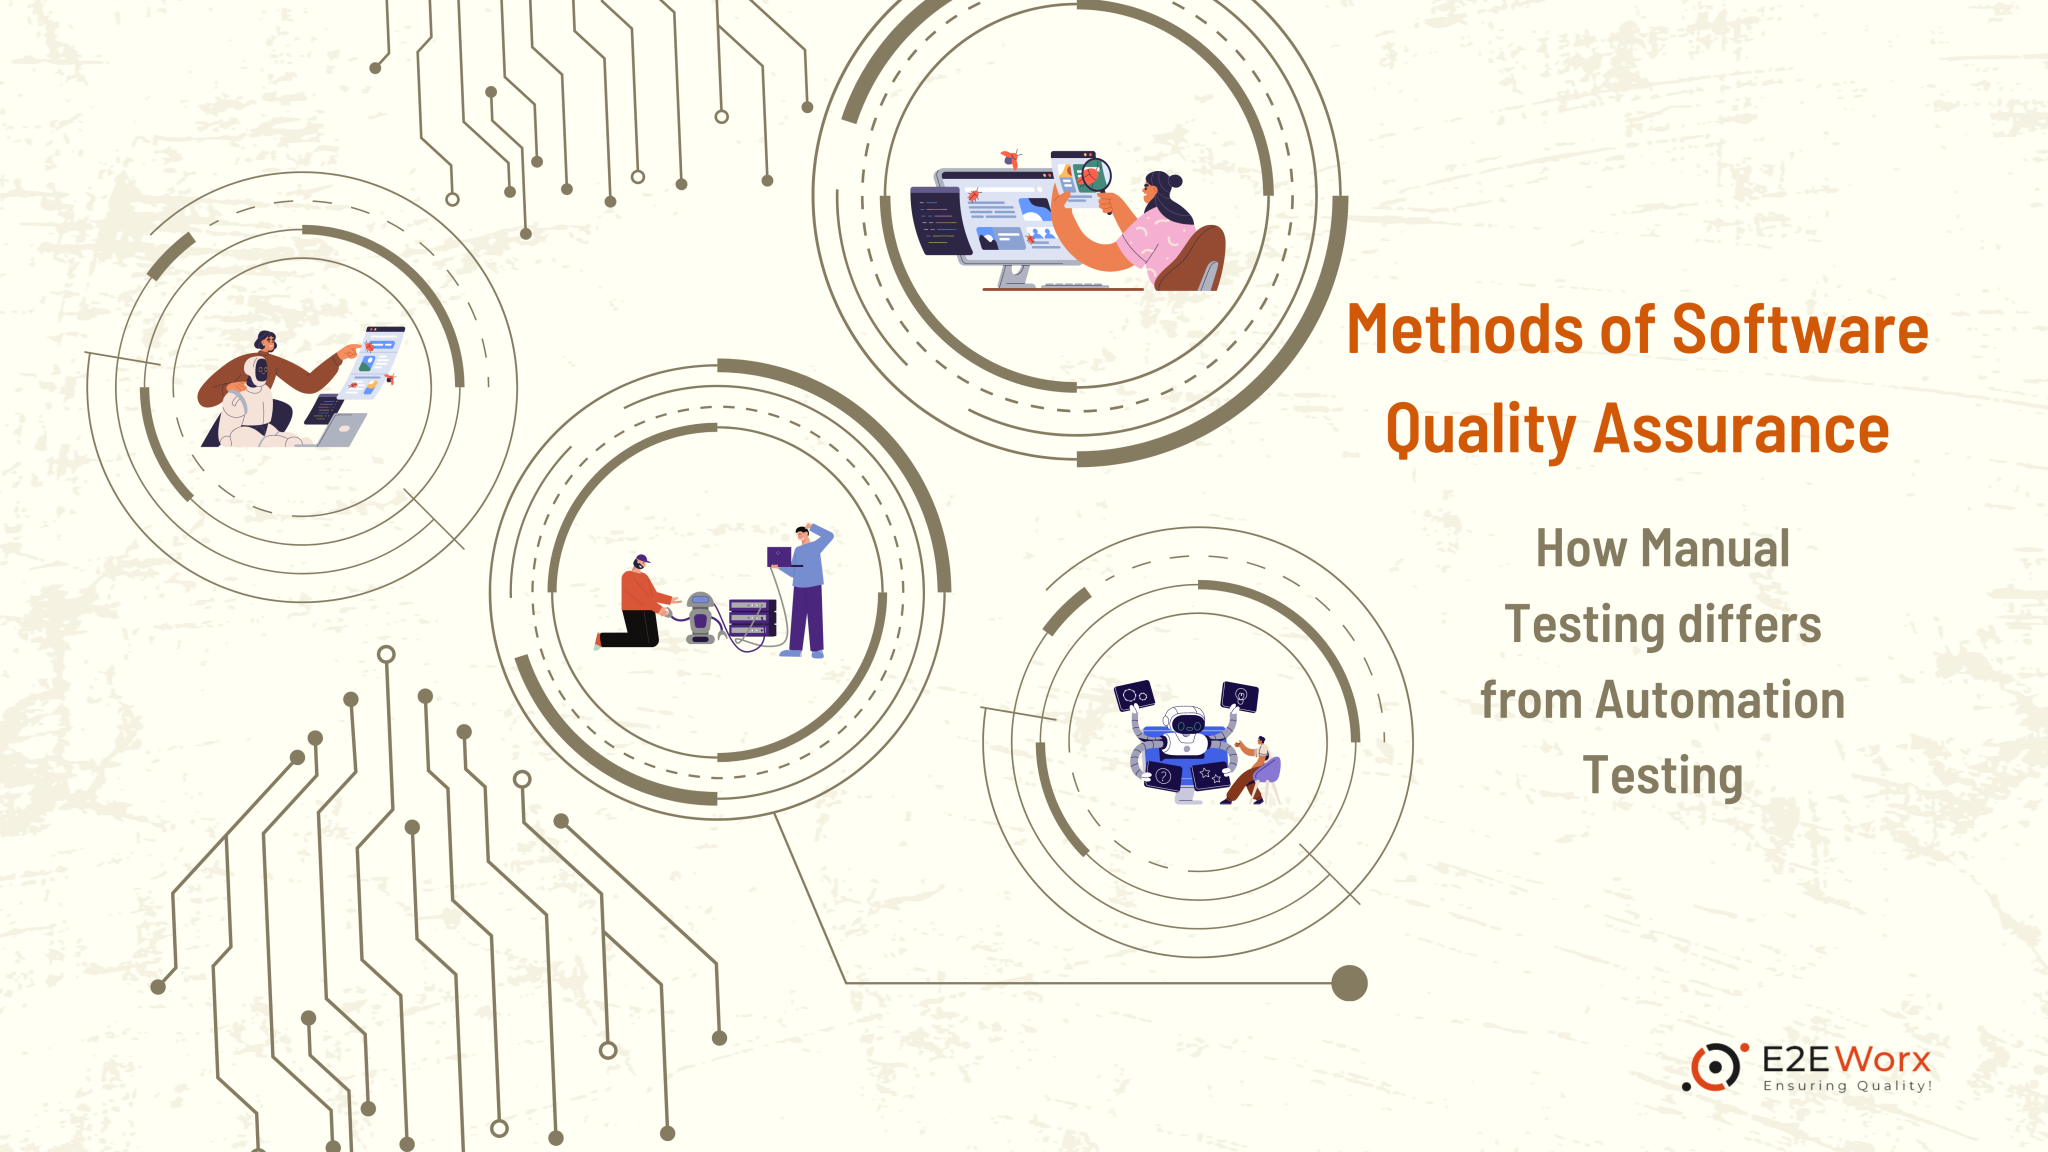 Methods of Software Quality Assurance - How Manual Testing differs from Automation Testing - E2EWorx Ensuring Quality